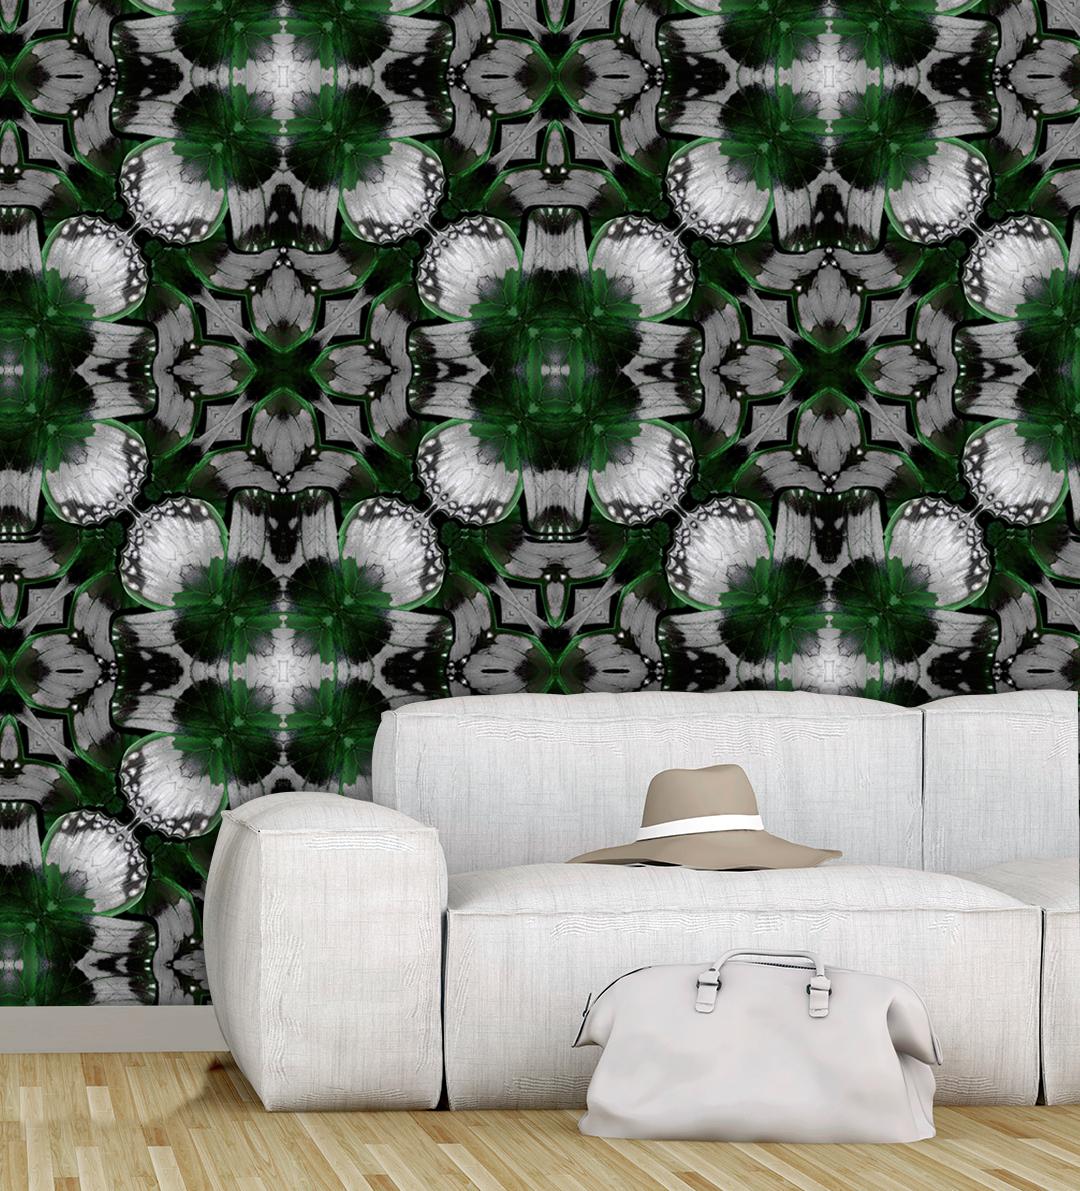 Feng Sui Drifter, from our Drifter Series, is inspired by the beauty and unique patterns of the Butterfly.
Our design interpretation, of their delicate and whimsical nature, add a touch of elegance and sophistication to any space. 

Available in